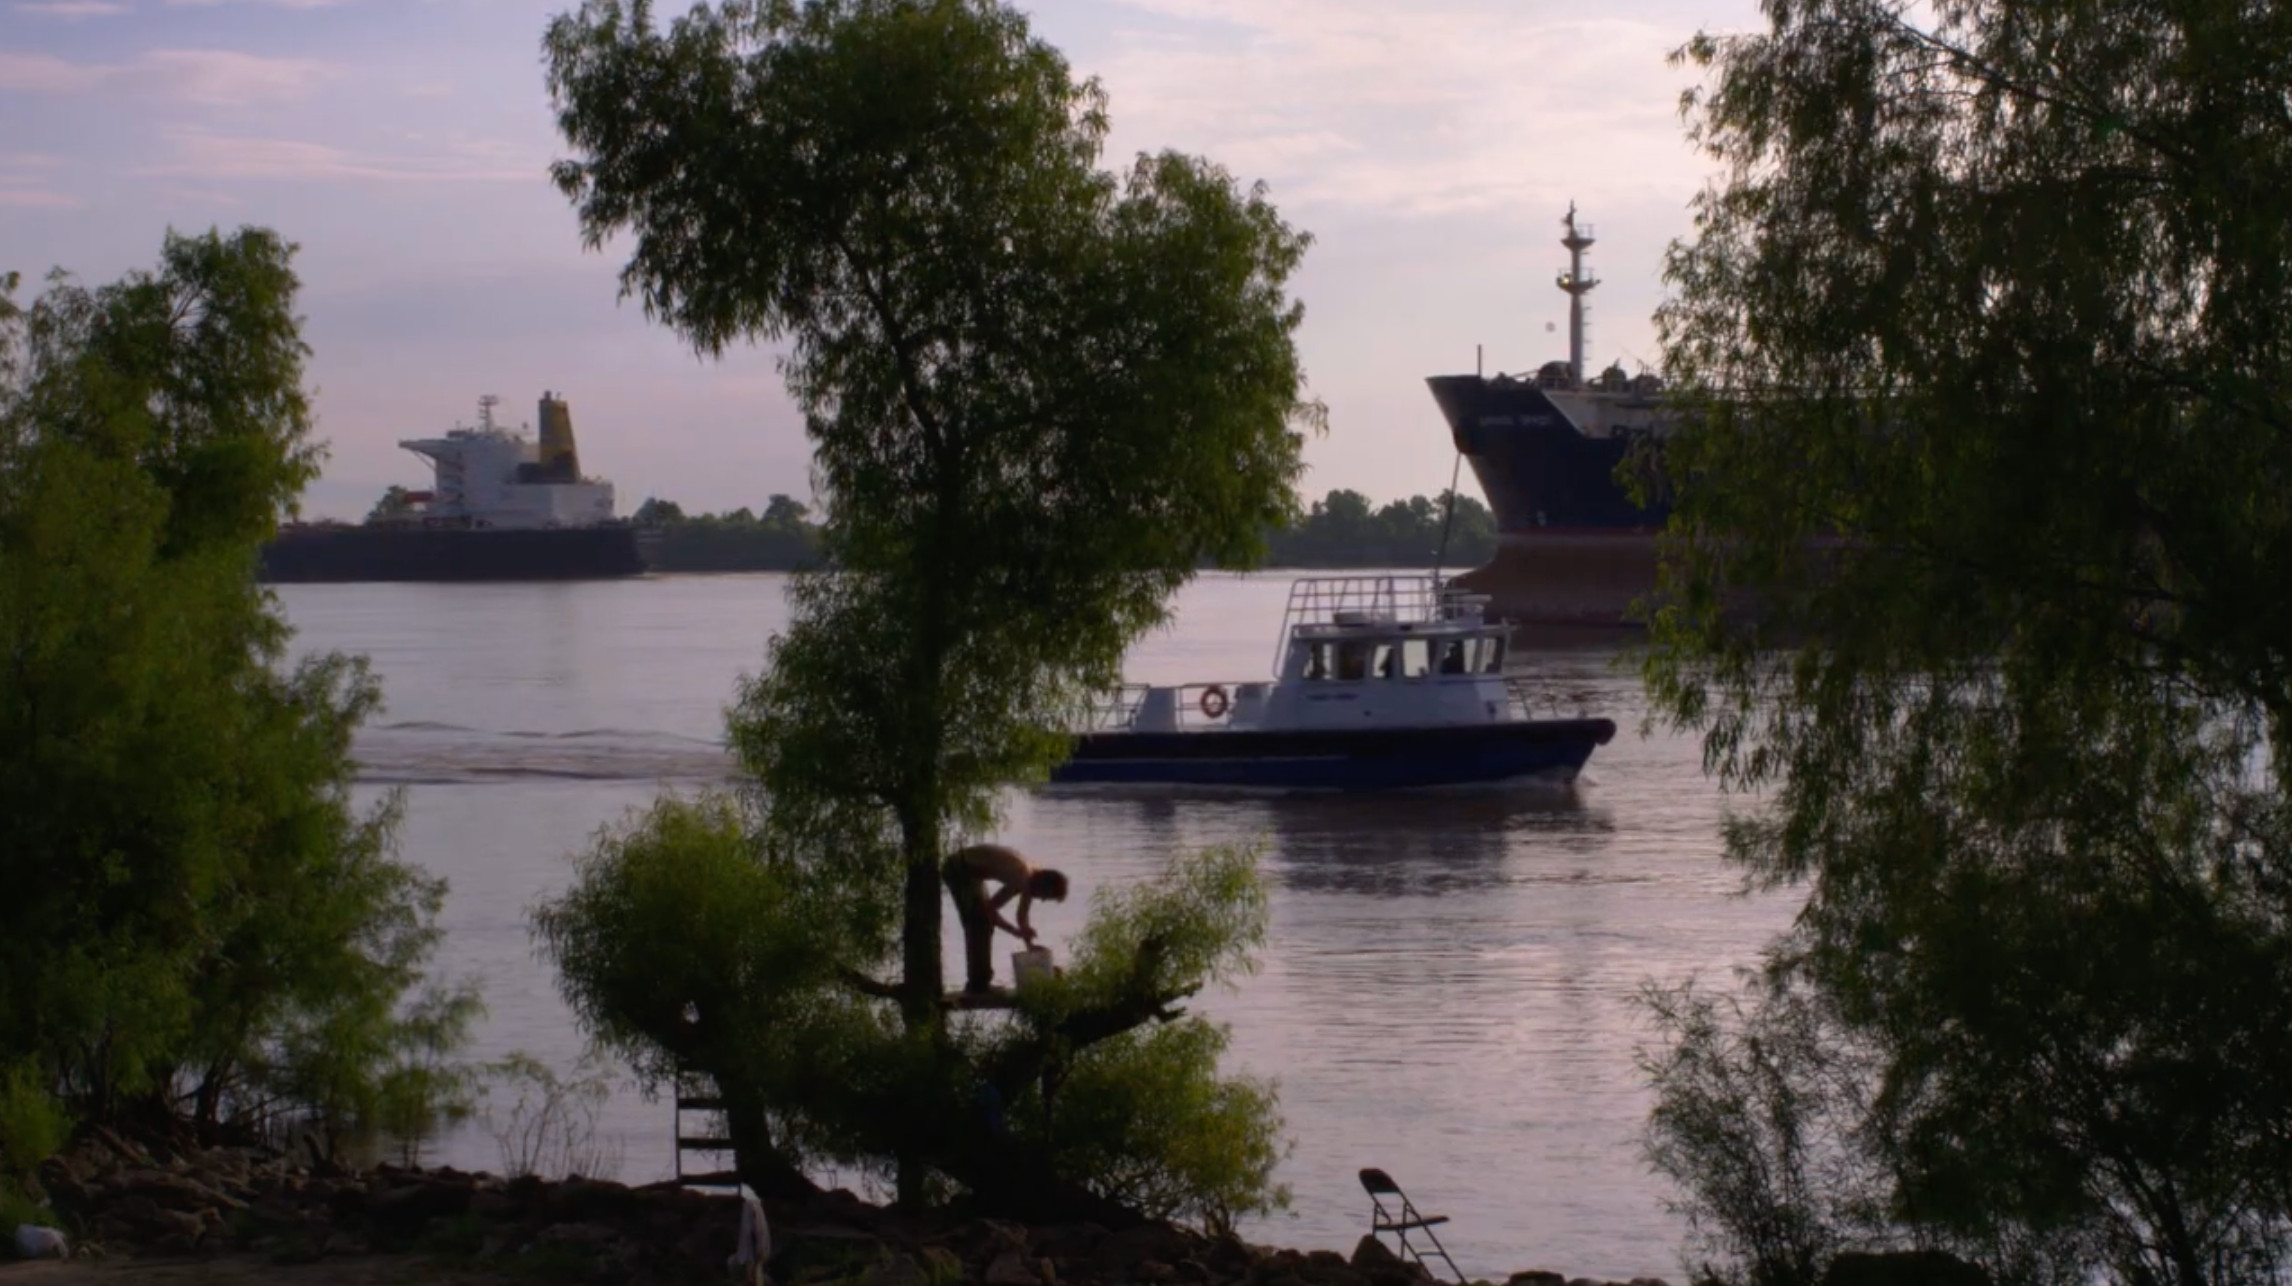 A still from Jeff Whetstone's The Batture Ritual (2018) depicting a boat on the Mississippi River